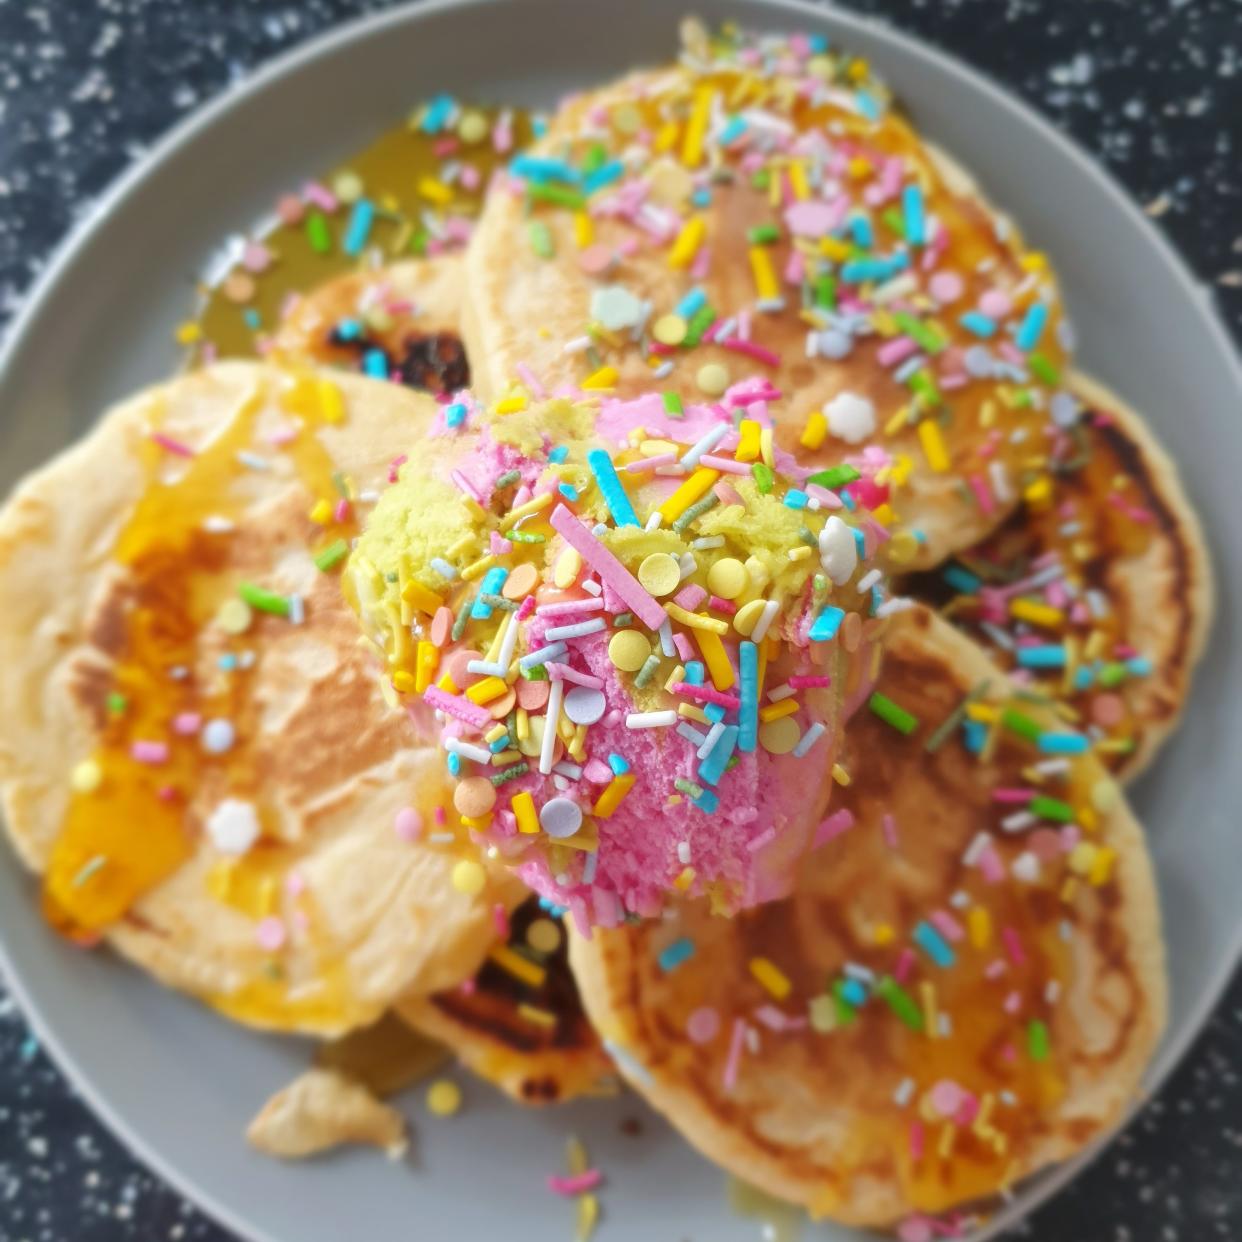 ice cream with sprinkles on homemade pancakes for dessert